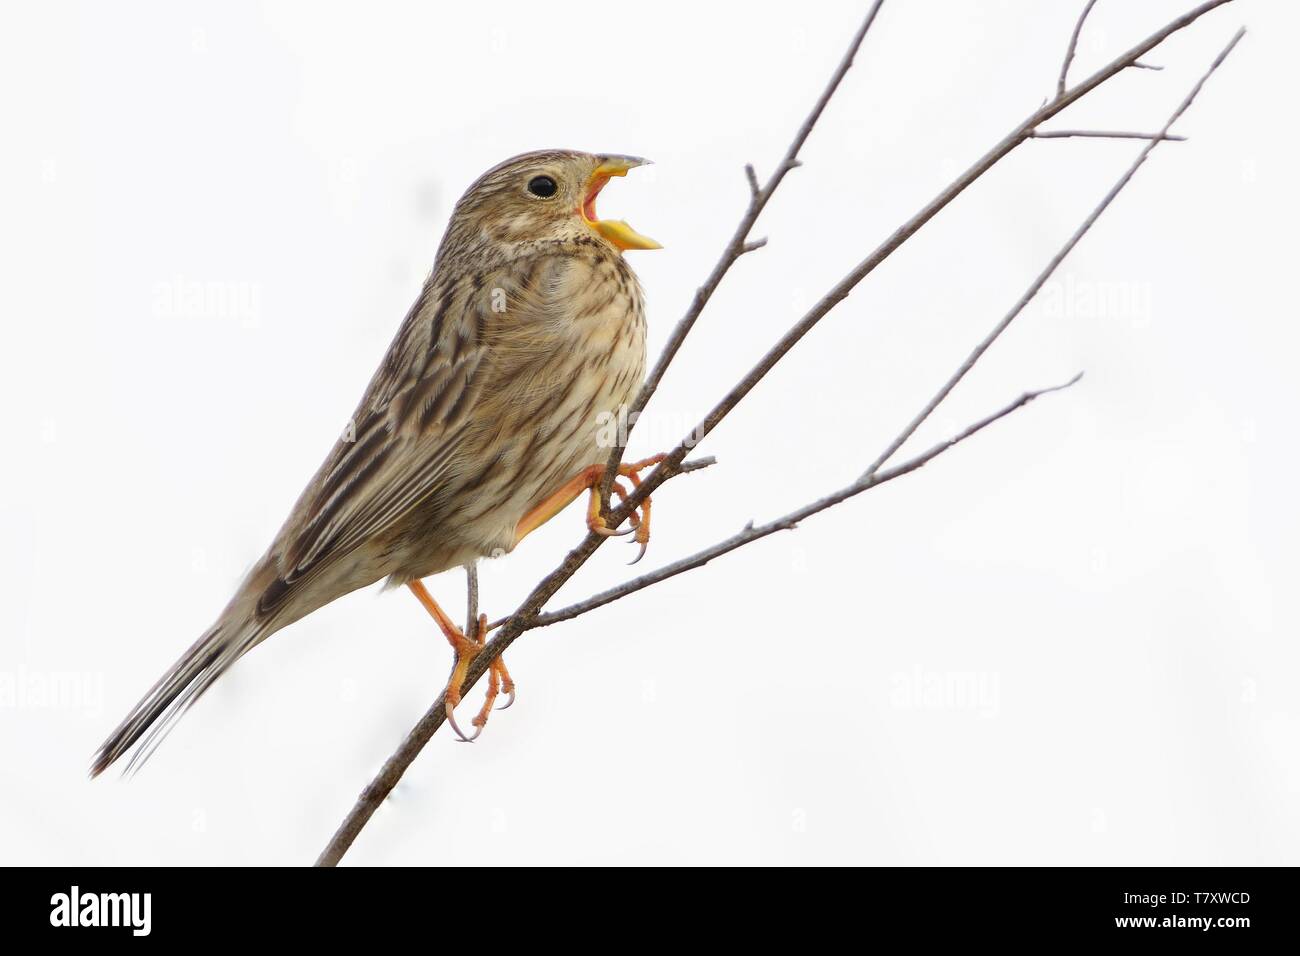 Corn Bunting - Emberiza calandra on the branch with white background. Stock Photo